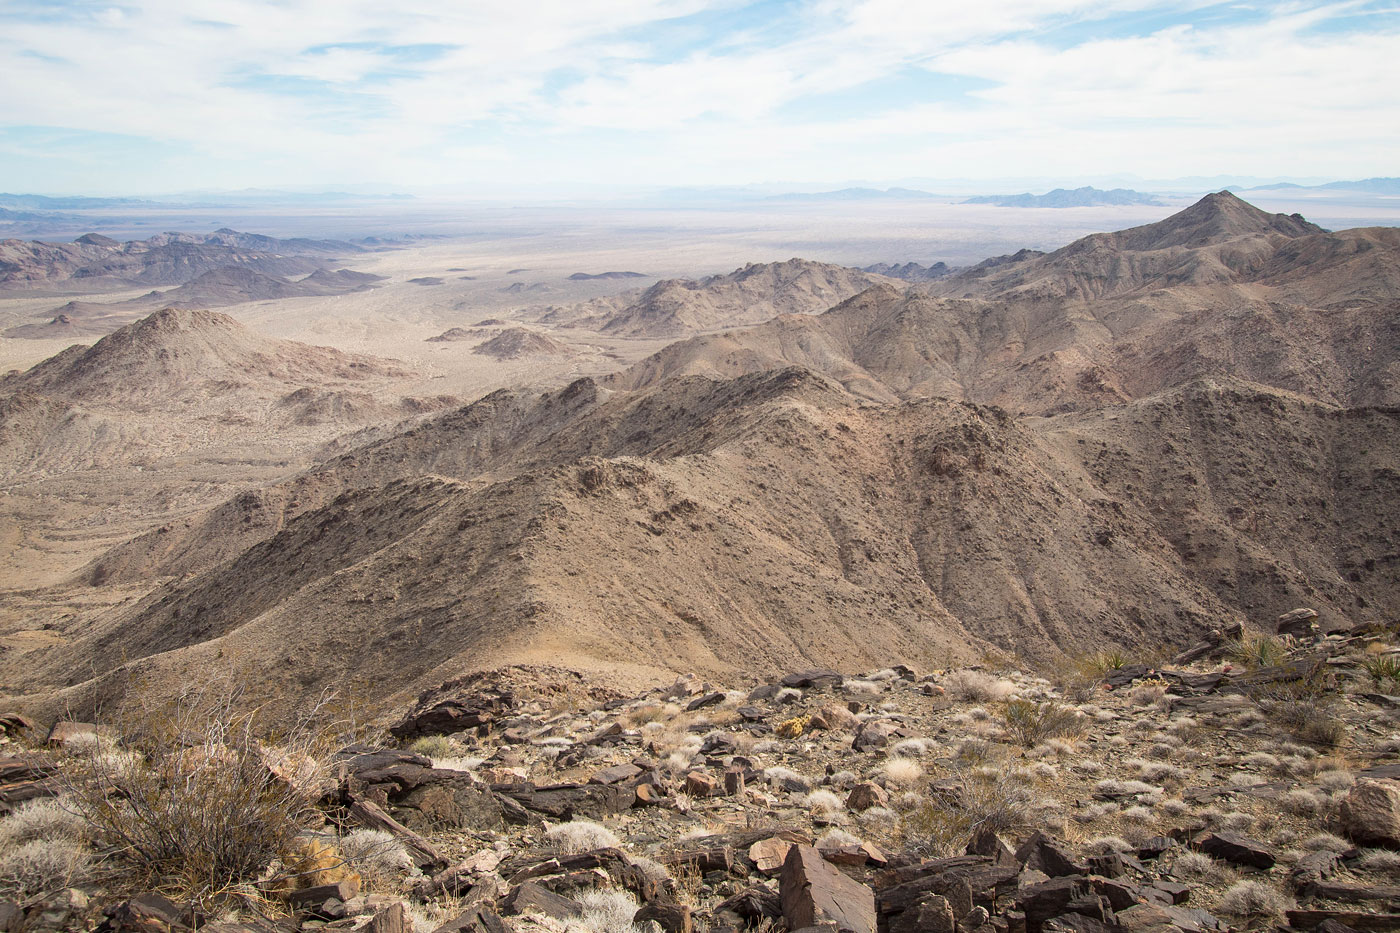 Hike Horn Peak and Turtle Mountains High Point in Turtle Mountains Wilderness Area BLM, California - Stav is Lost